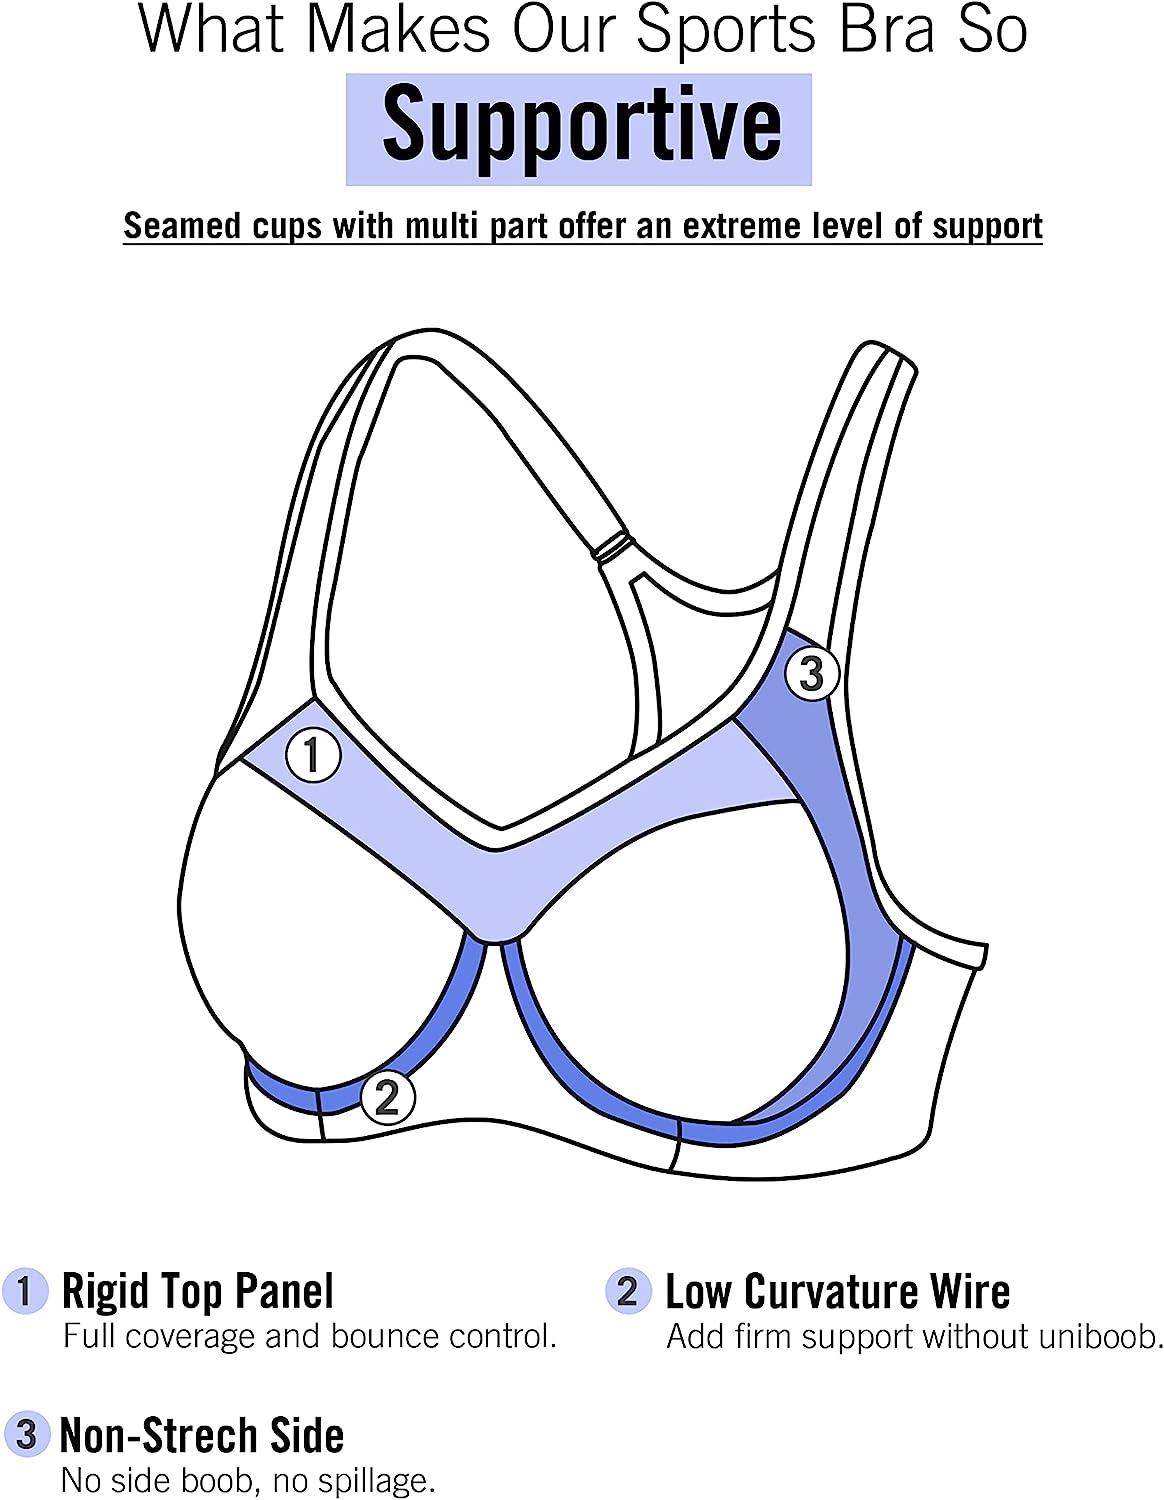 SYROKAN Women's Full Support High Impact Racerback Lightly Lined Underwire  Sports Bra : : Clothing, Shoes & Accessories